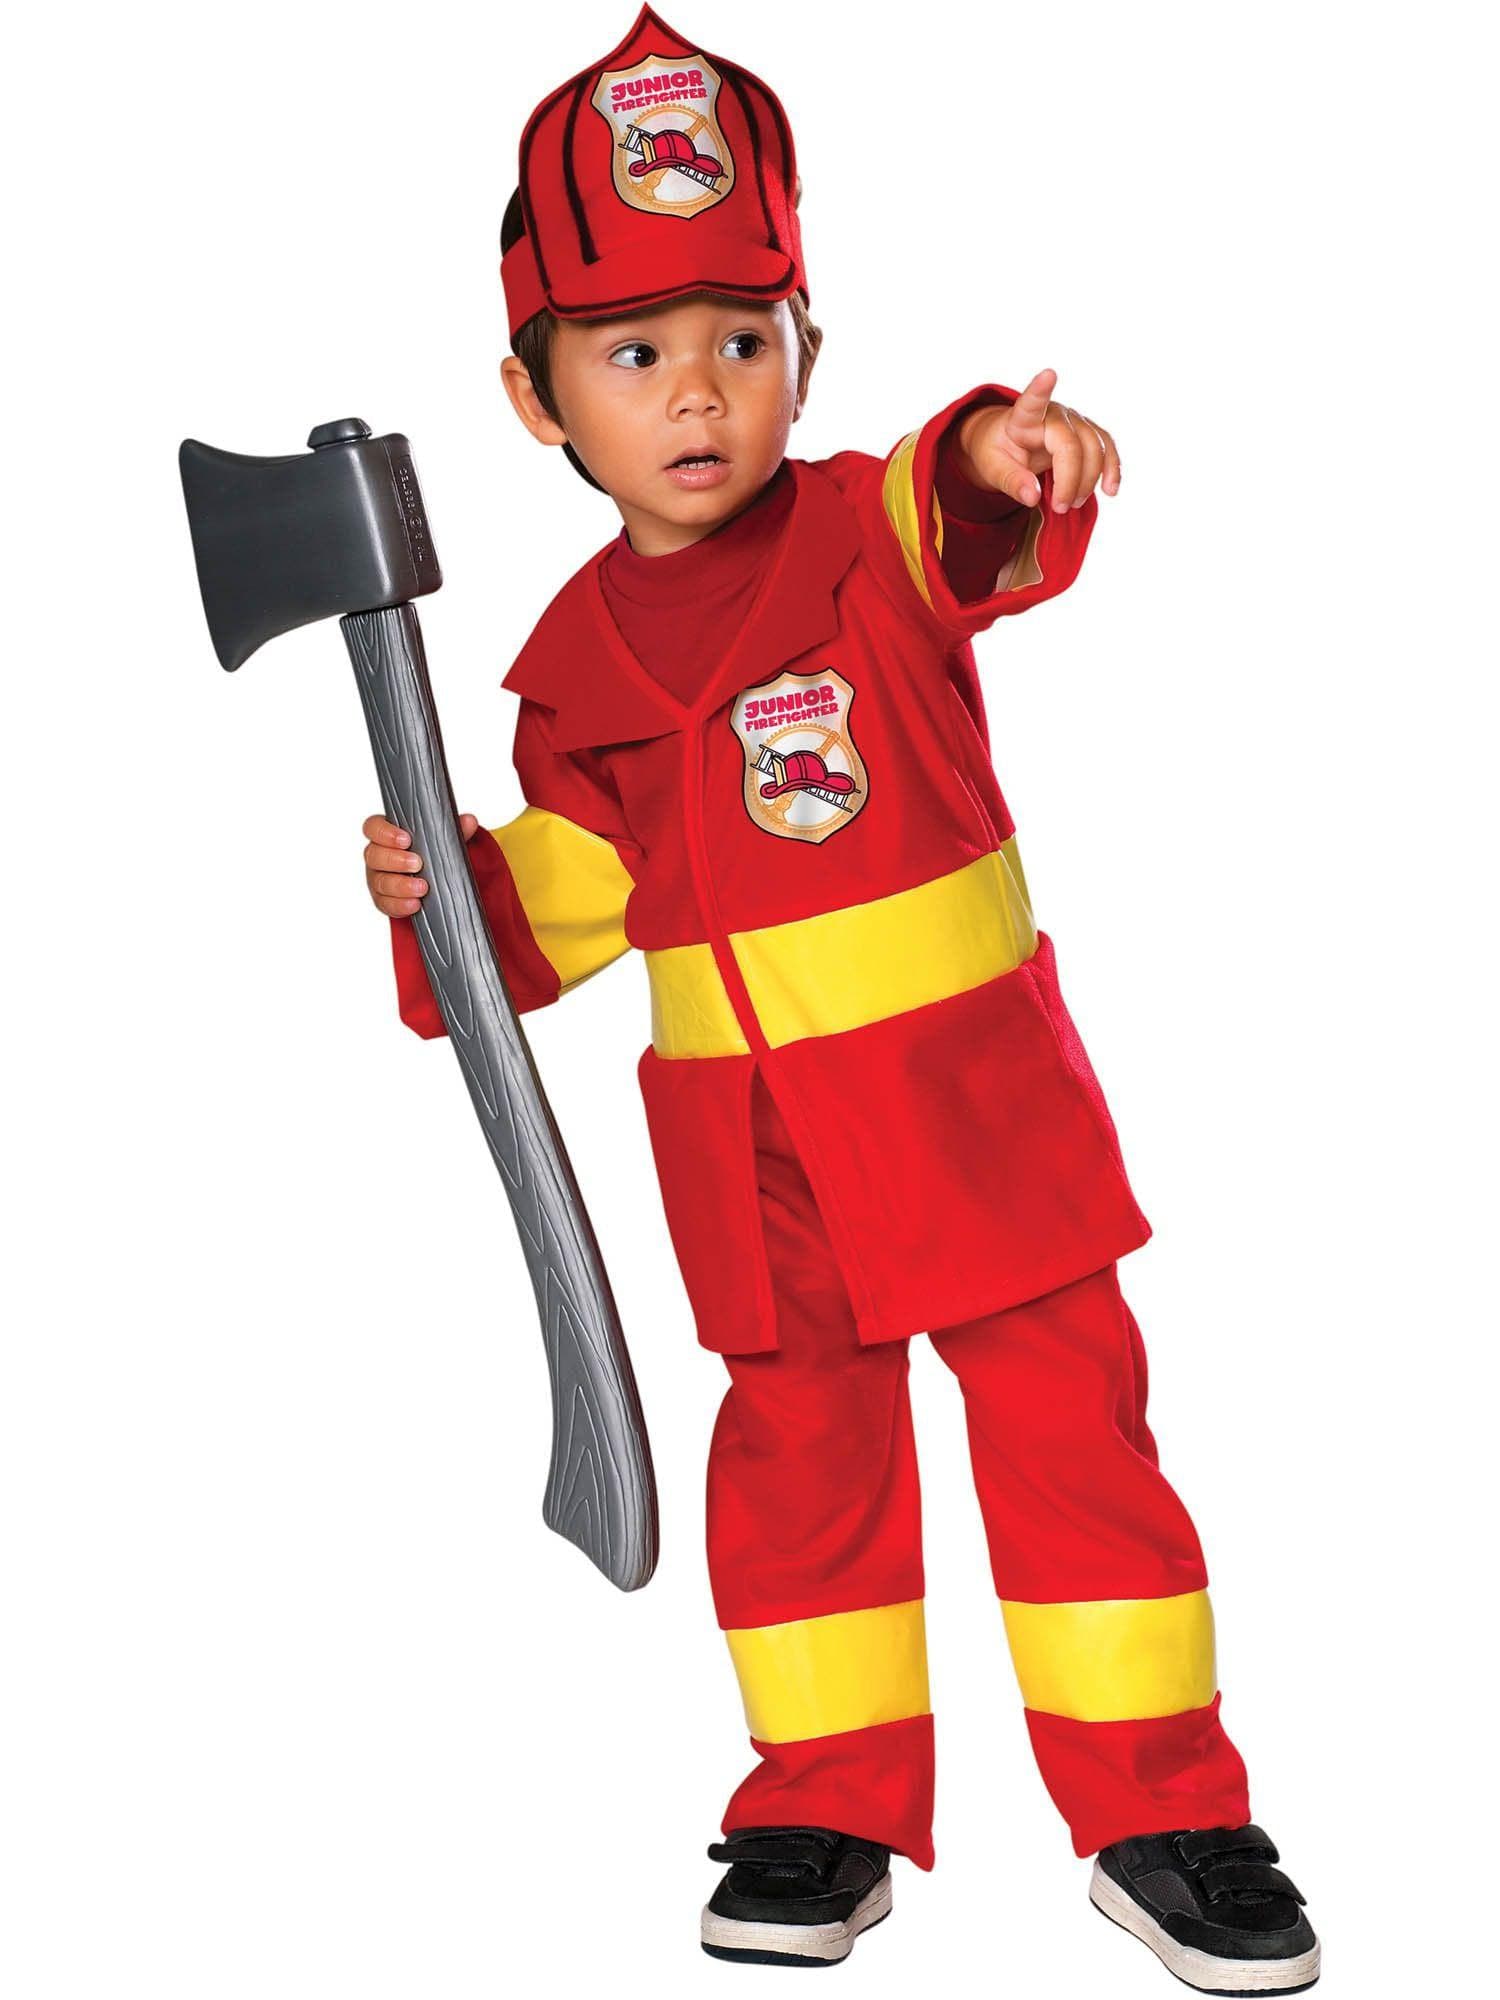 Baby/Toddler Jr. Firefighter Costume - costumes.com